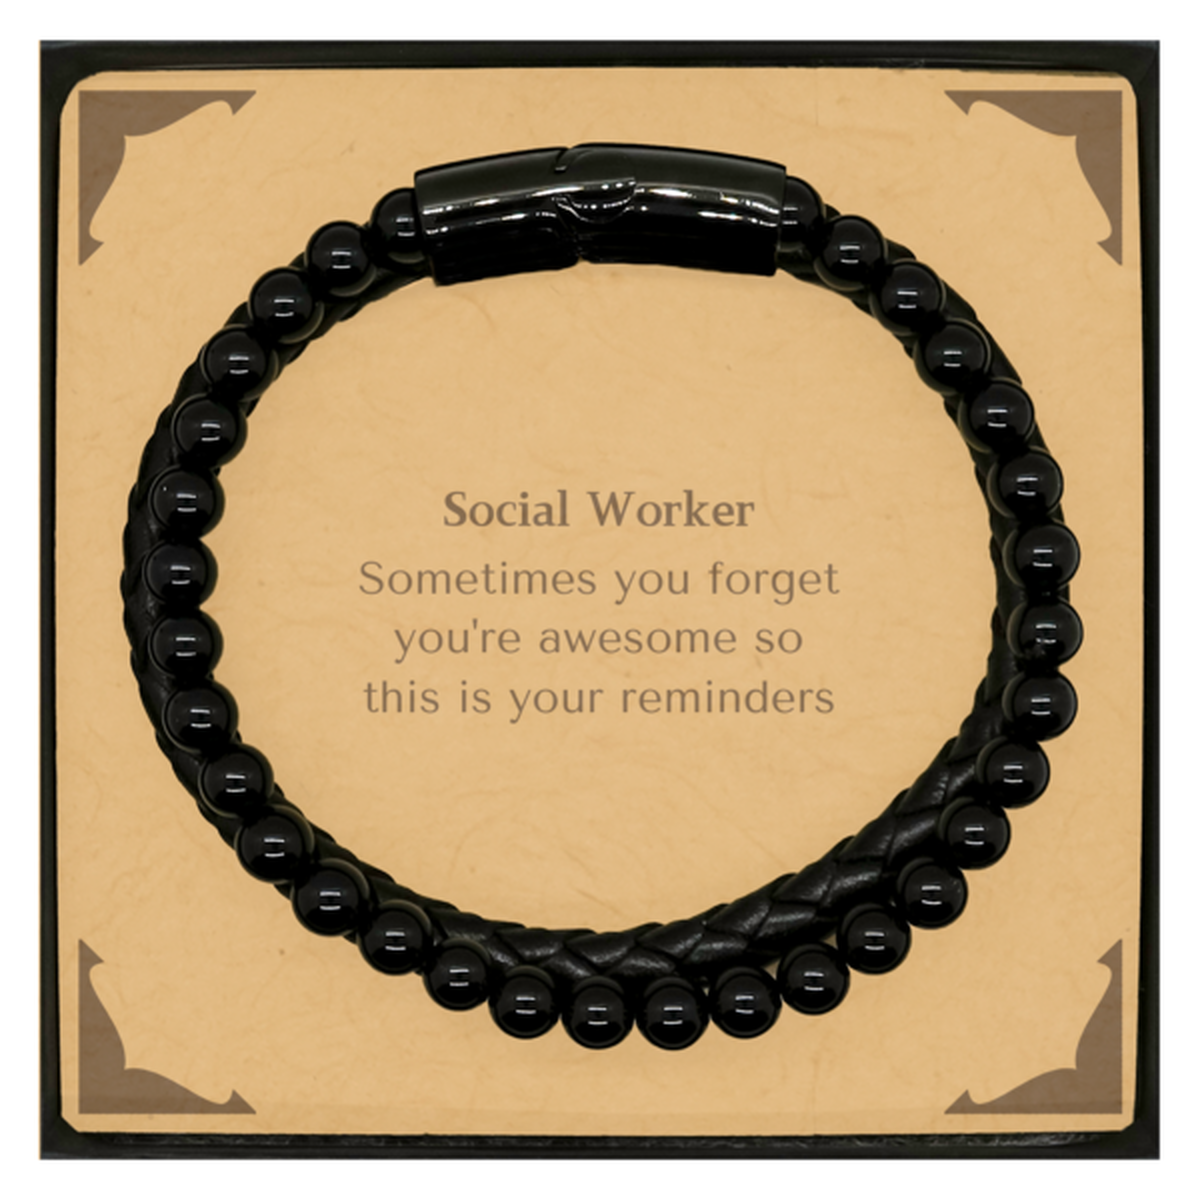 Sentimental Social Worker Stone Leather Bracelets, Social Worker Sometimes you forget you're awesome so this is your reminders, Graduation Christmas Birthday Gifts for Social Worker, Men, Women, Coworkers